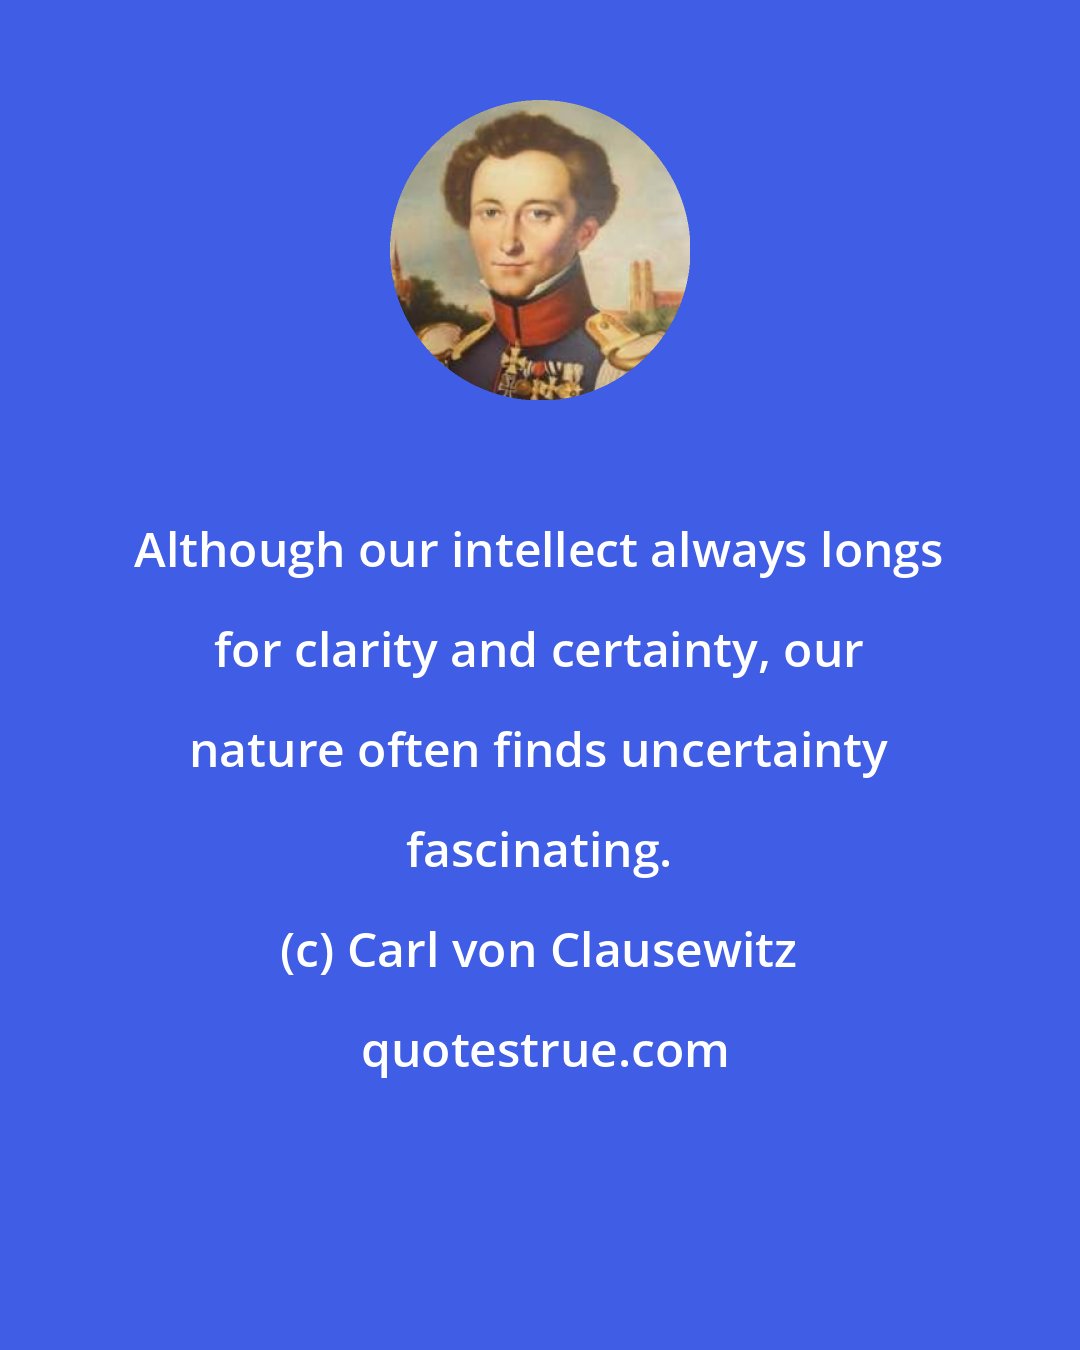 Carl von Clausewitz: Although our intellect always longs for clarity and certainty, our nature often finds uncertainty fascinating.